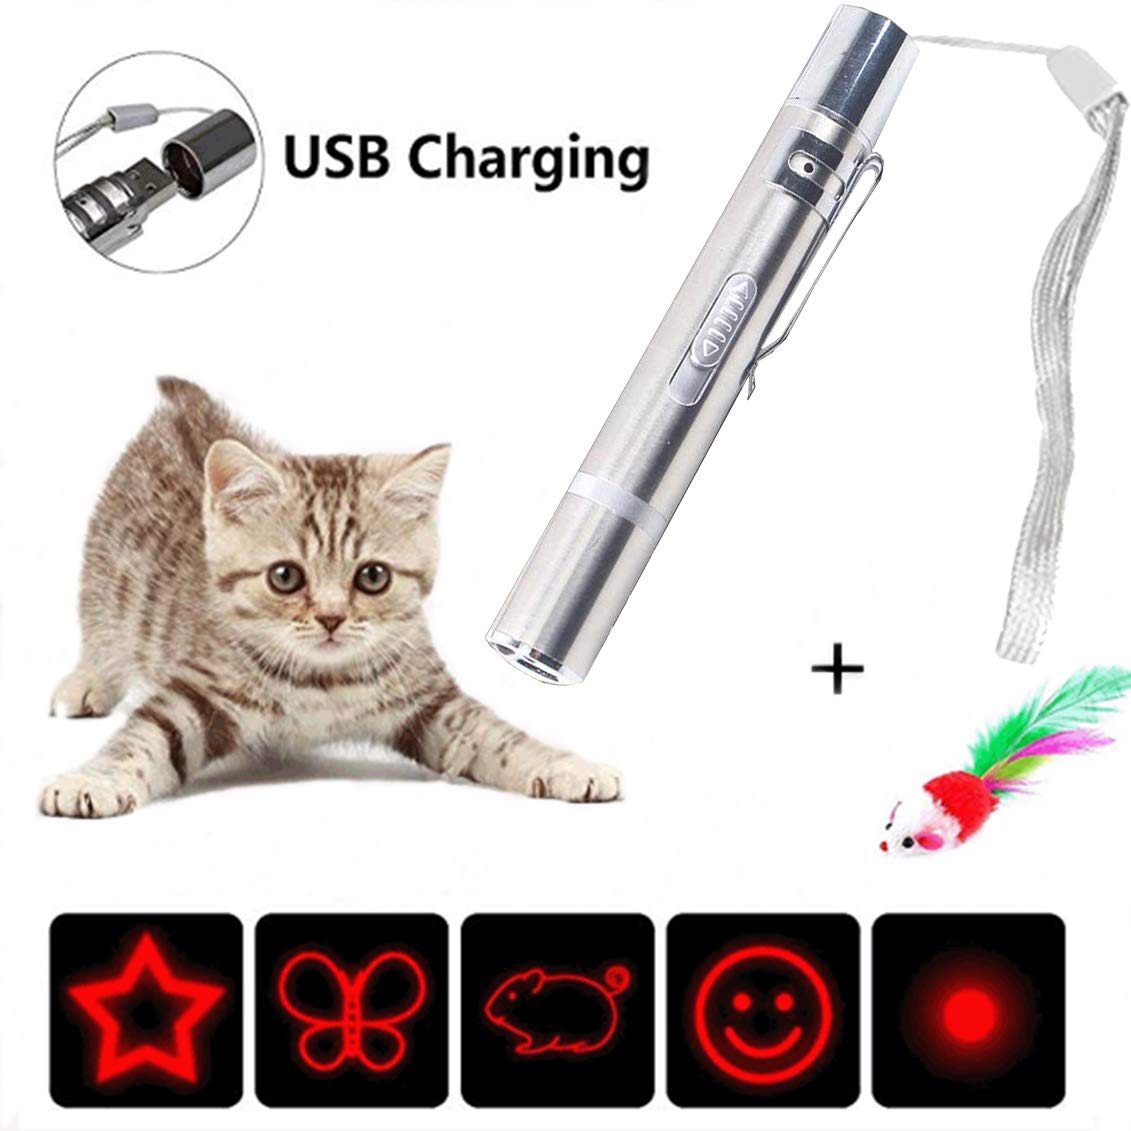 X-CHENG Cat Toys -7 in 1 Mini Interactive- -USB Rechargeable - Pet Cat Catch Single Interactive Exercise Cat Training Tool (gray)